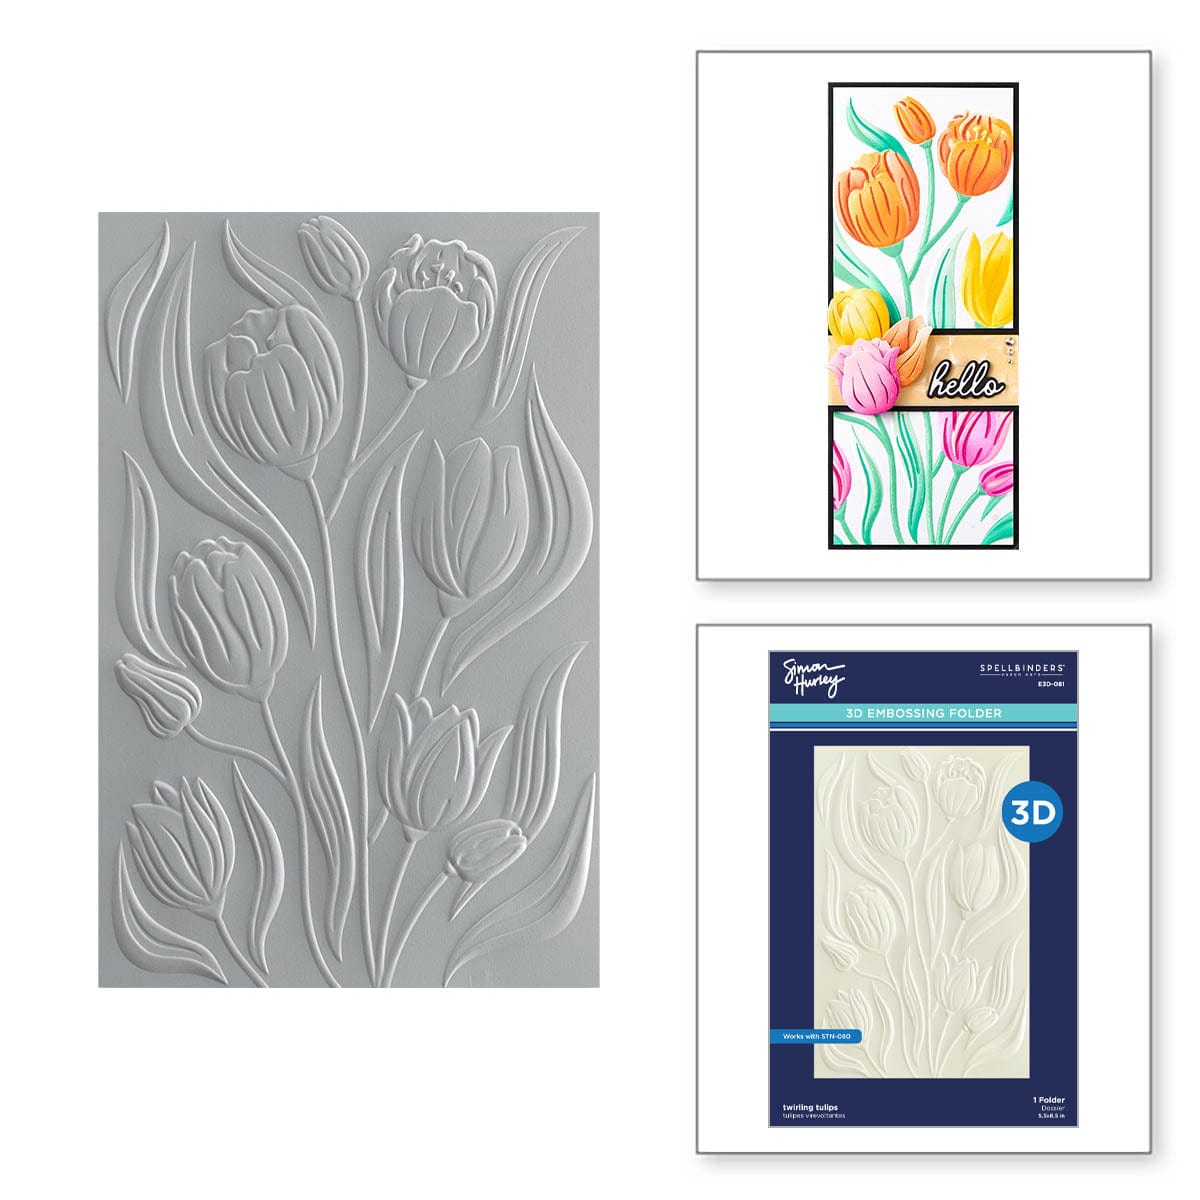 Image of Twirling Tulips 3D Embossing Folder from the Tulip Garden Collection by Simon Hurley